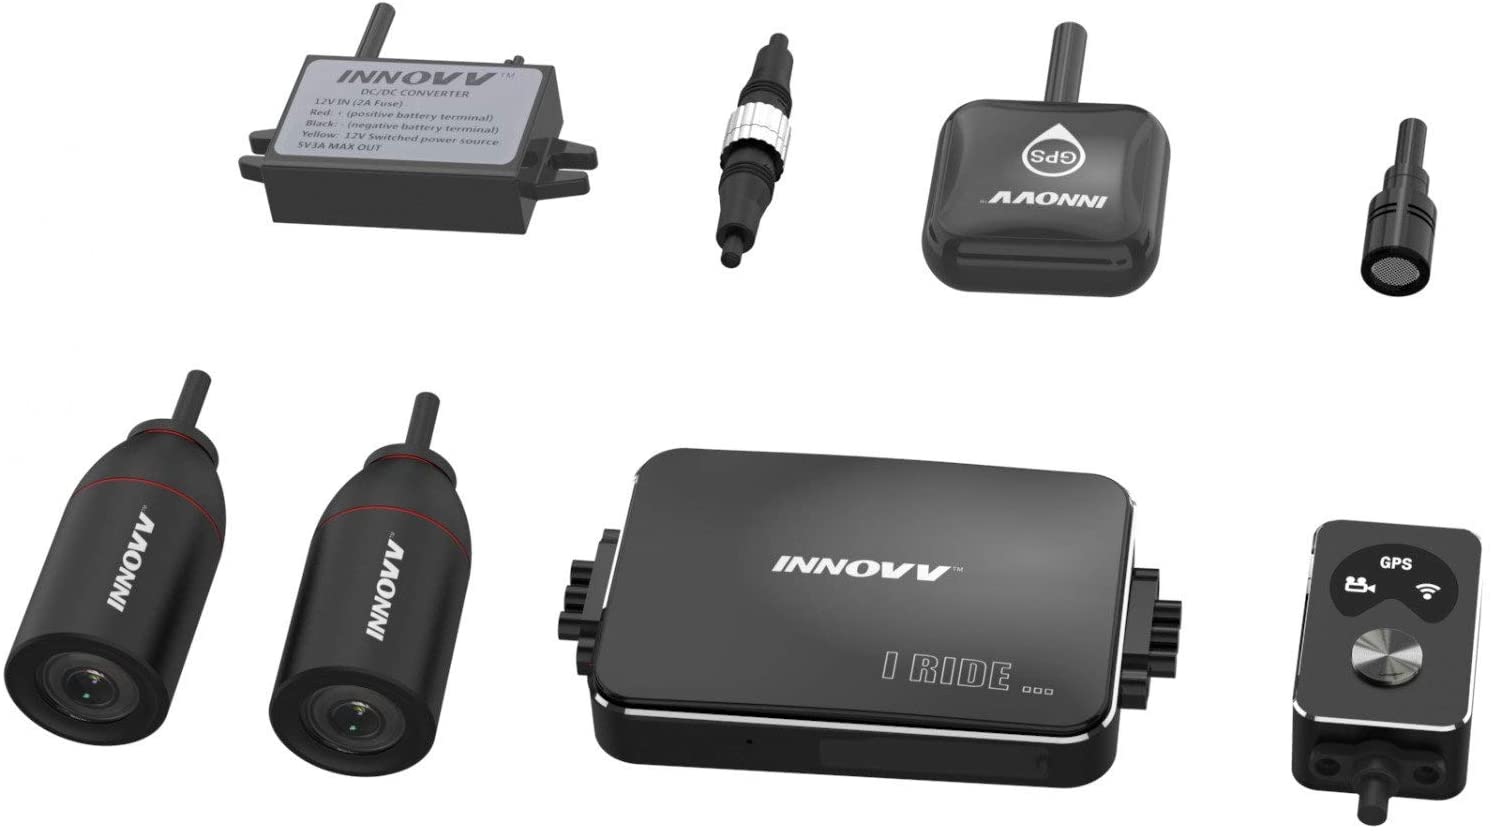 INNOVV K3 Dual Channel Motorcyle Motocam with WiFi, GPS and Parking Mode (32GB)